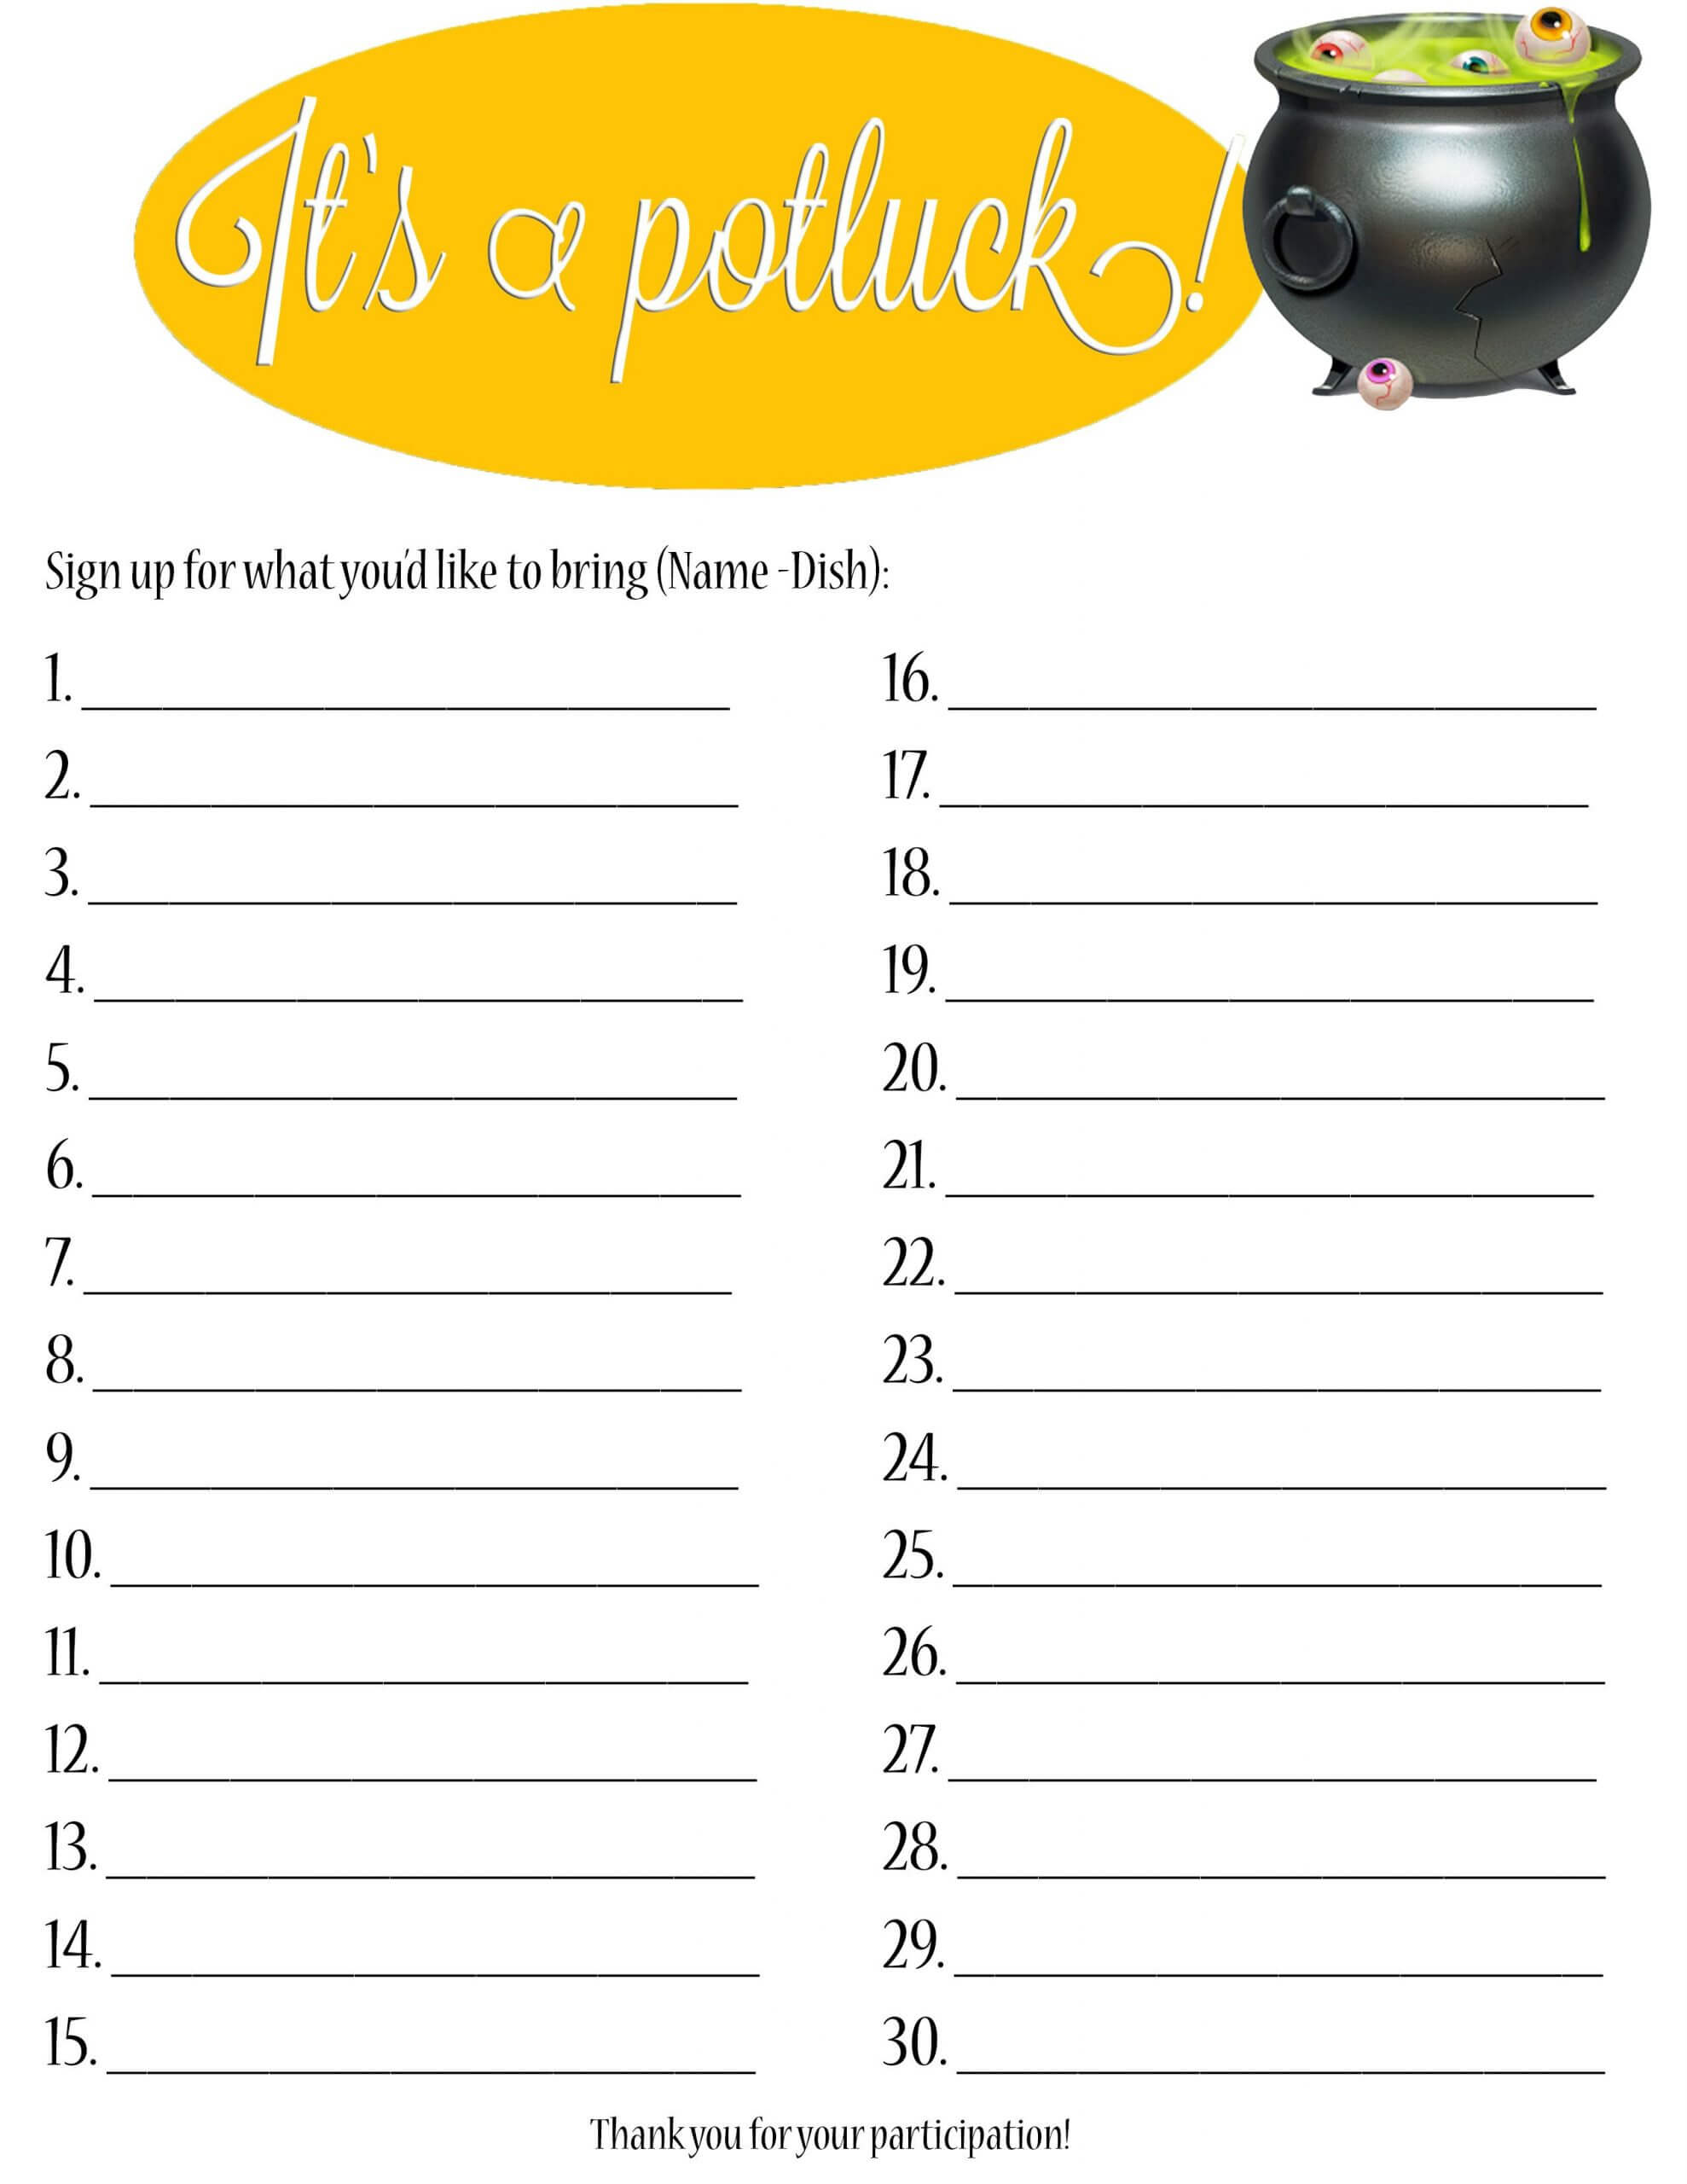 Potluck Signup Sheet Template Word Best Sign Up Sheets For Intended For Potluck Signup Sheet Template Word